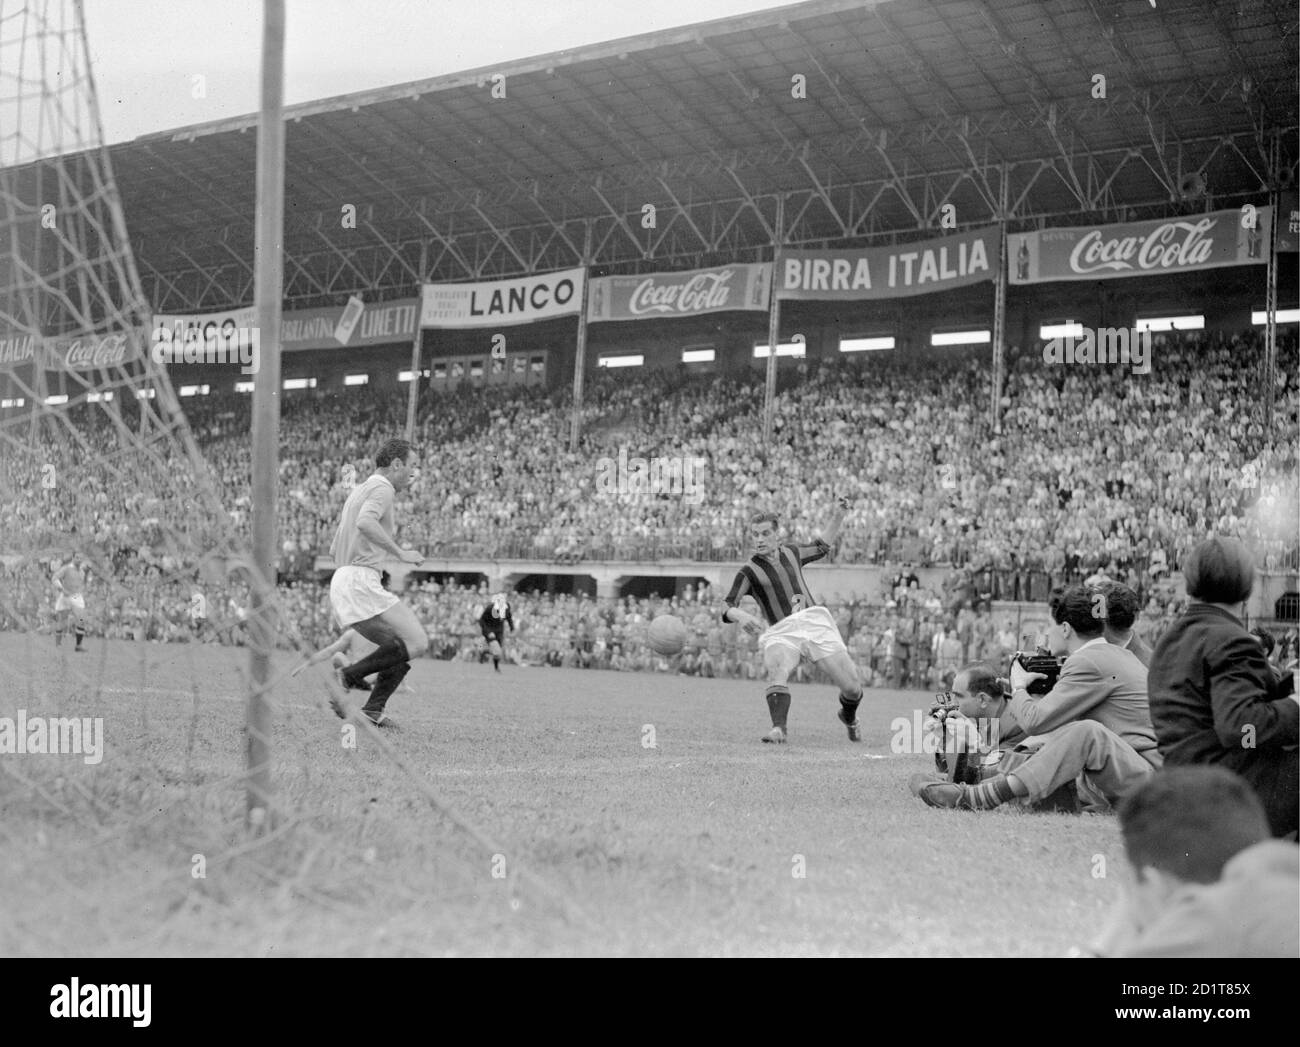 Gunnar Nordahl (Milan) in action during the match Milan-Lazio (1-2) of the  1950/1951 Serie A football championship (37th matchday). Despite being  defeated, Milan won the 4th Scudetto. Milan (San Siro Stadium), 10